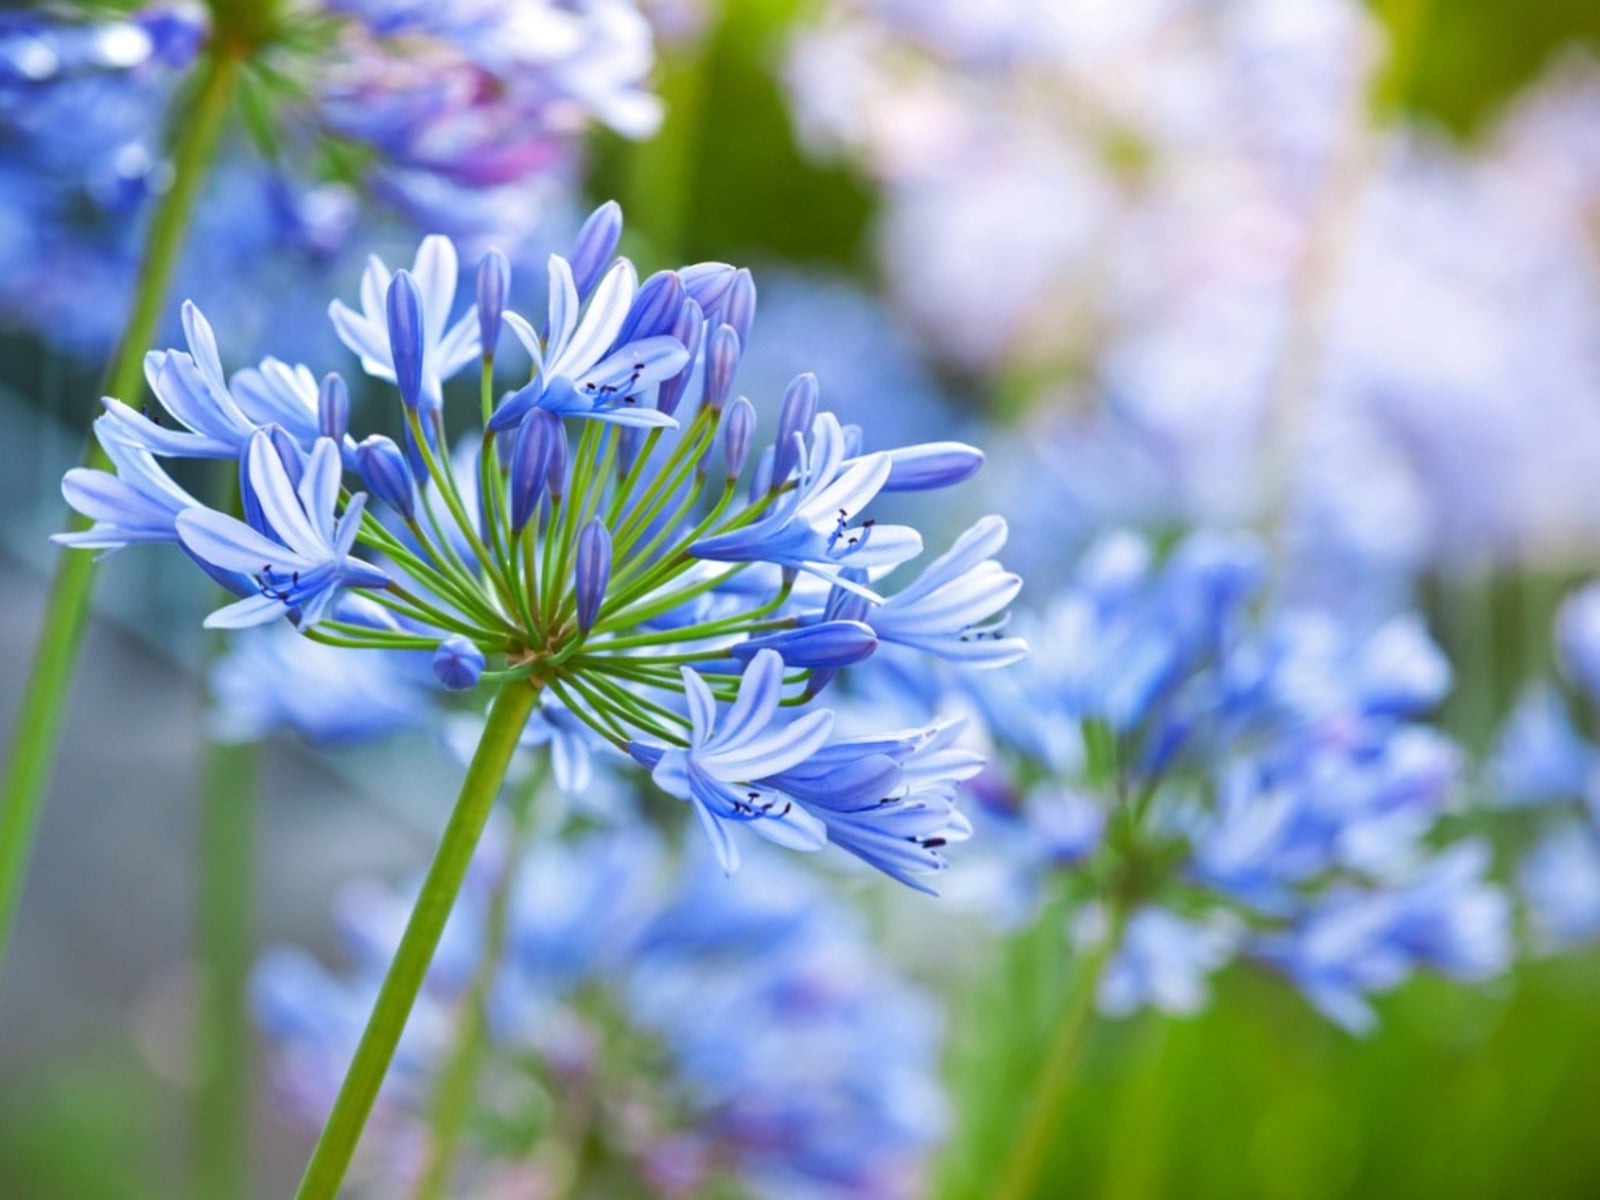 Agapanthus Flowers: Tips For Growing Agapanthus Plants